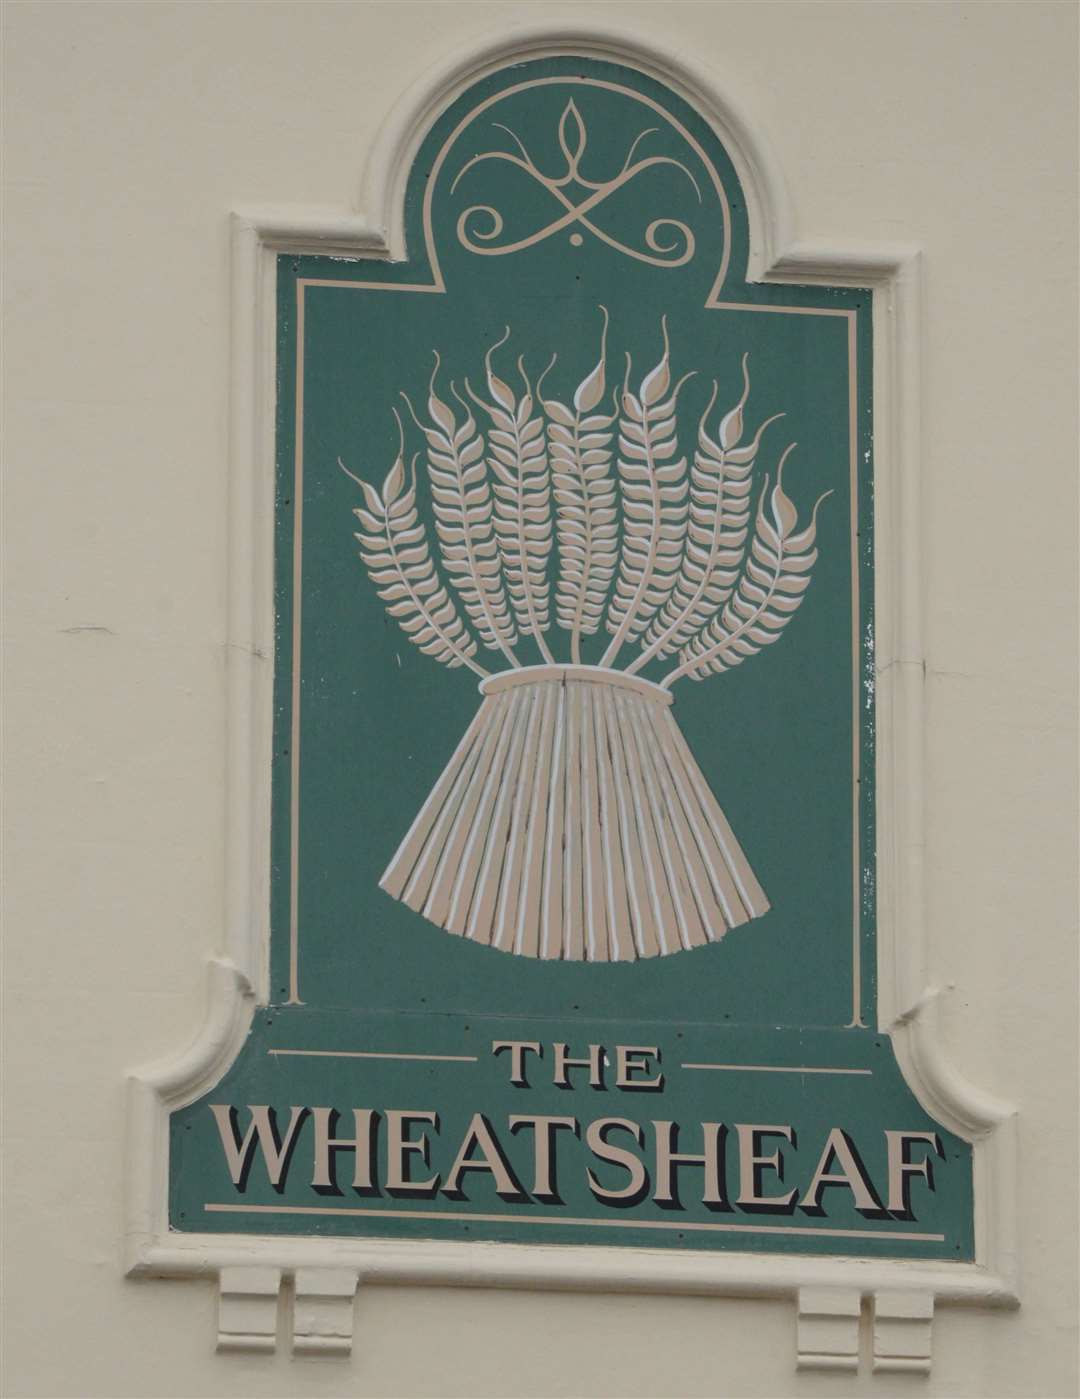 The Wheatsheaf has given its name to the junction of the A229 and A274